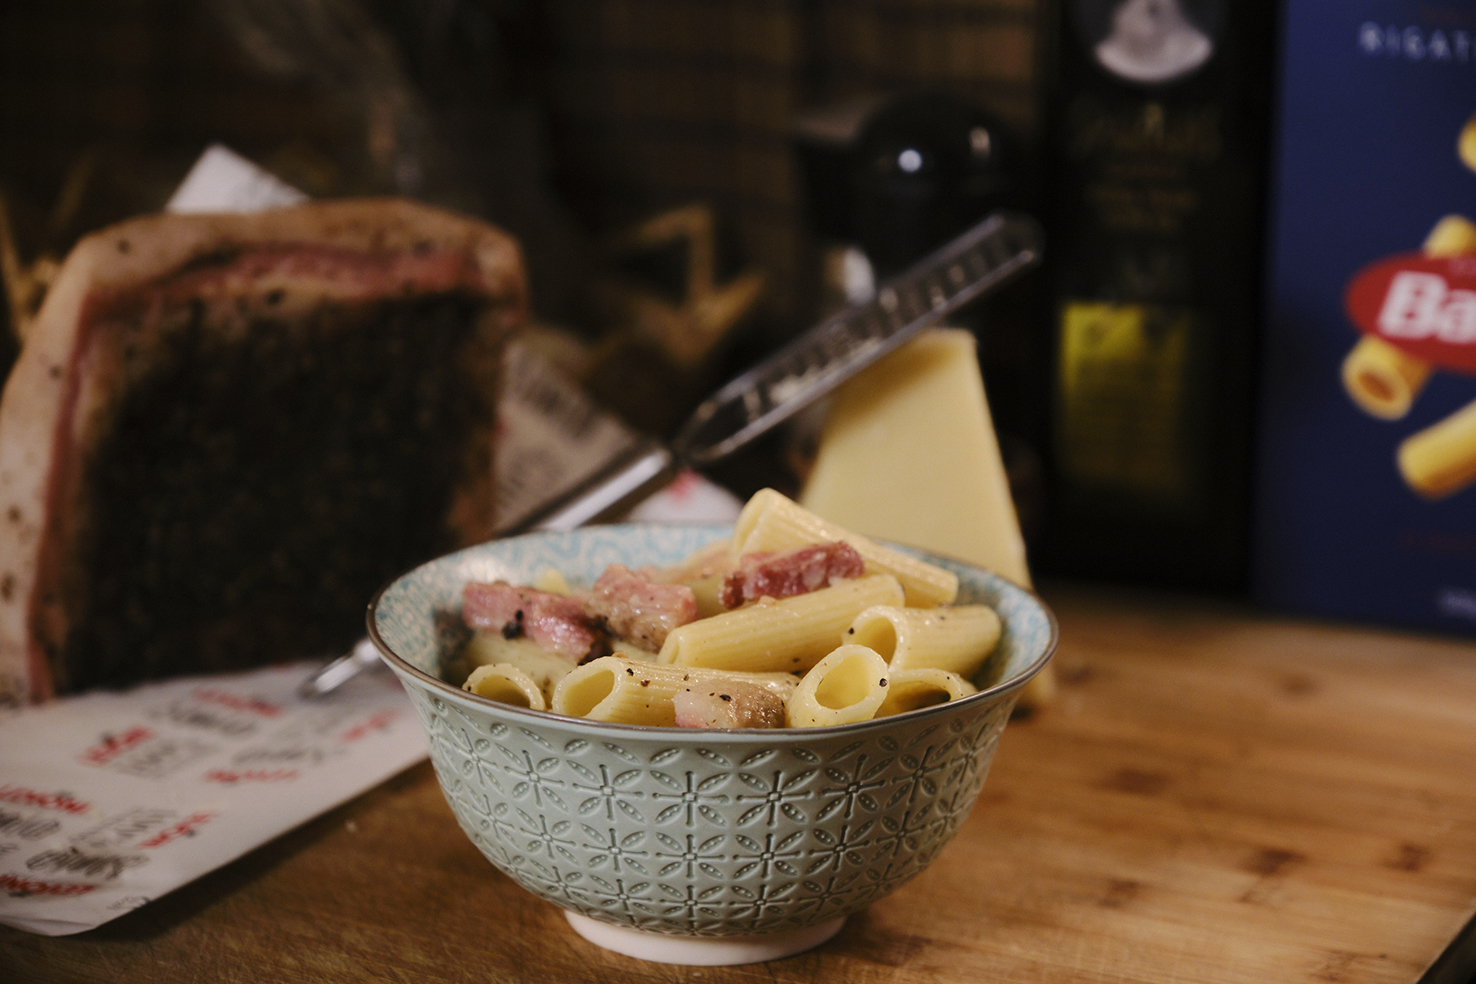 "A finished dish of rigatoni pasta with chunks of pink quanciale served in an ornate blue bowl on a wooden countertop. Behind the bowl, there’s a large wedge of cheese, a bottle of olive oil, and a box of Barilla pasta, suggesting the ingredients used in the recipe. The blurred background includes a cutting board with a large slab of seasoned meat, adding depth and context to the home cooking theme. The image captures a cozy, inviting meal ready to be enjoyed."